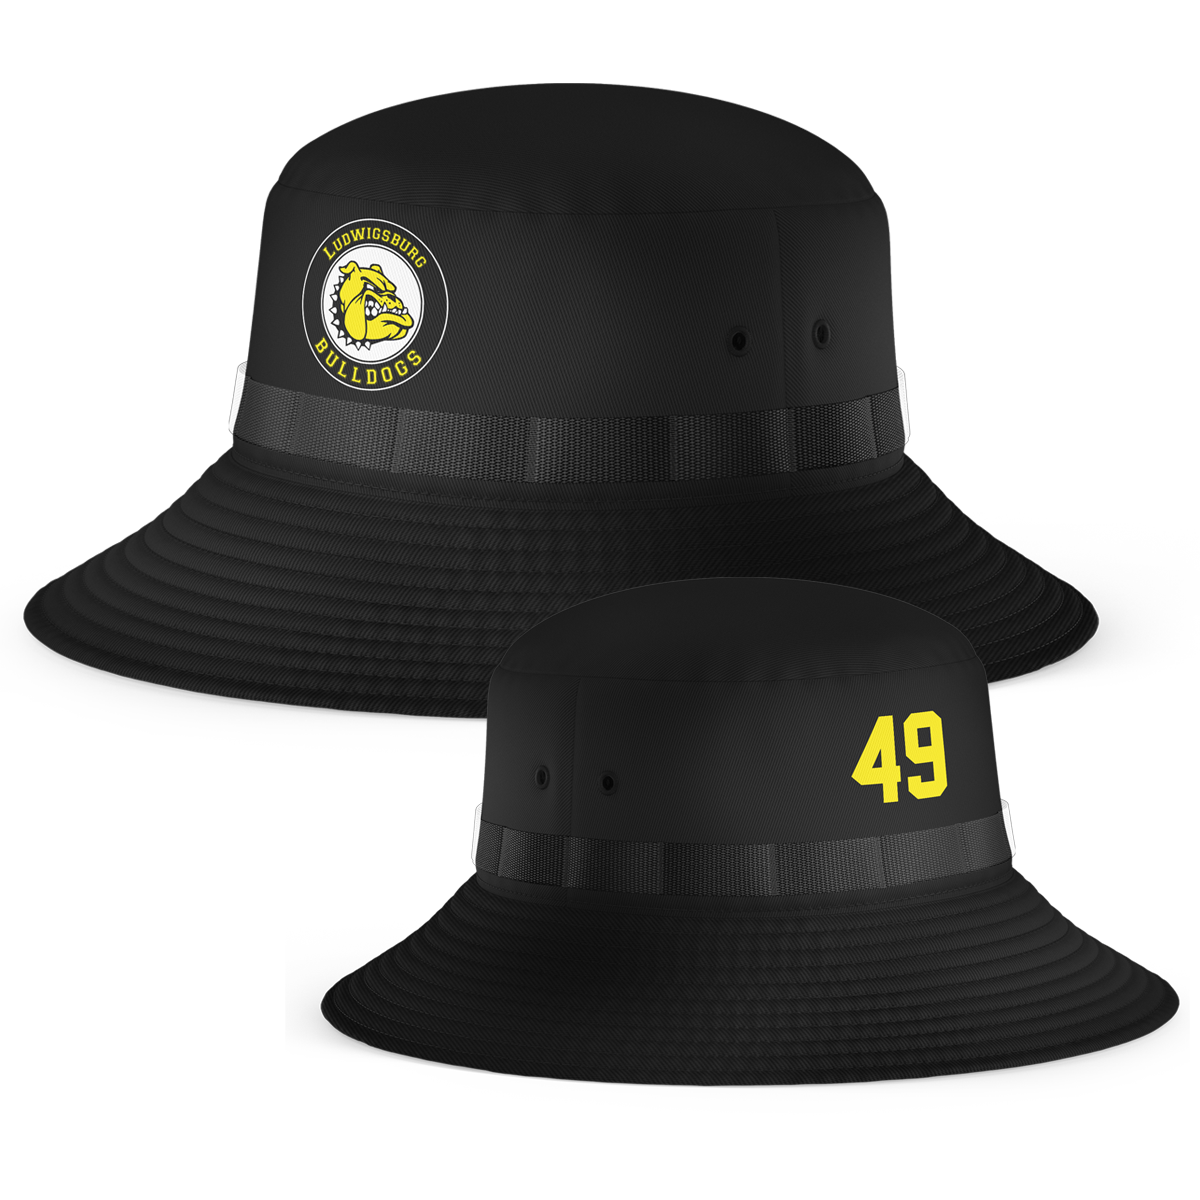 LB-Bulldogs Bucket Hat with Playernumber/Initials